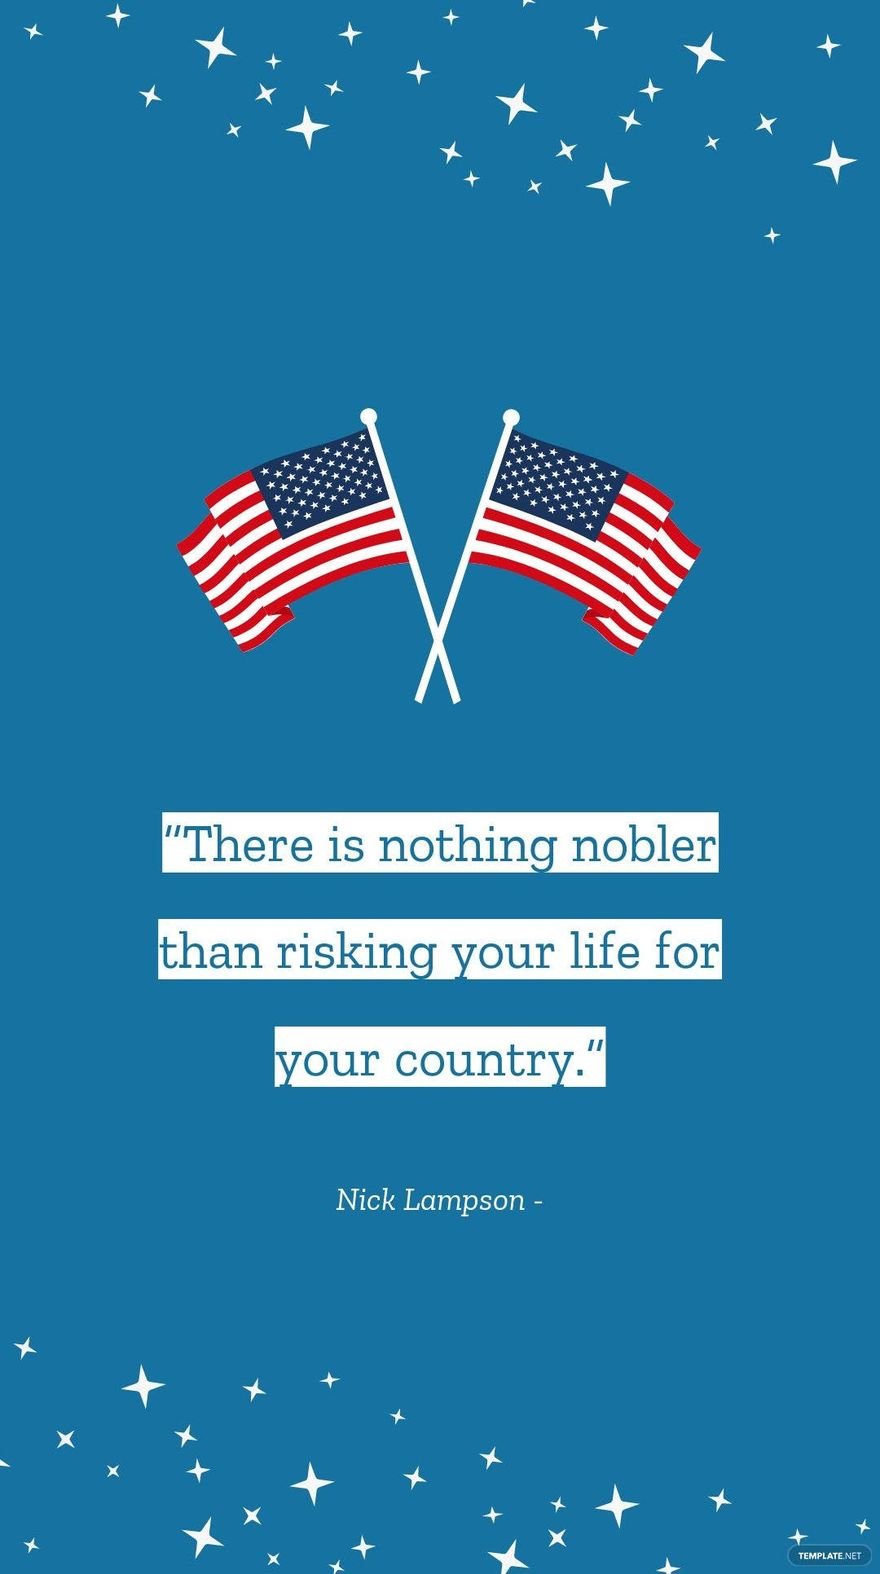 Free Nick Lampson - “There is nothing nobler than risking your life for your country.” in JPG